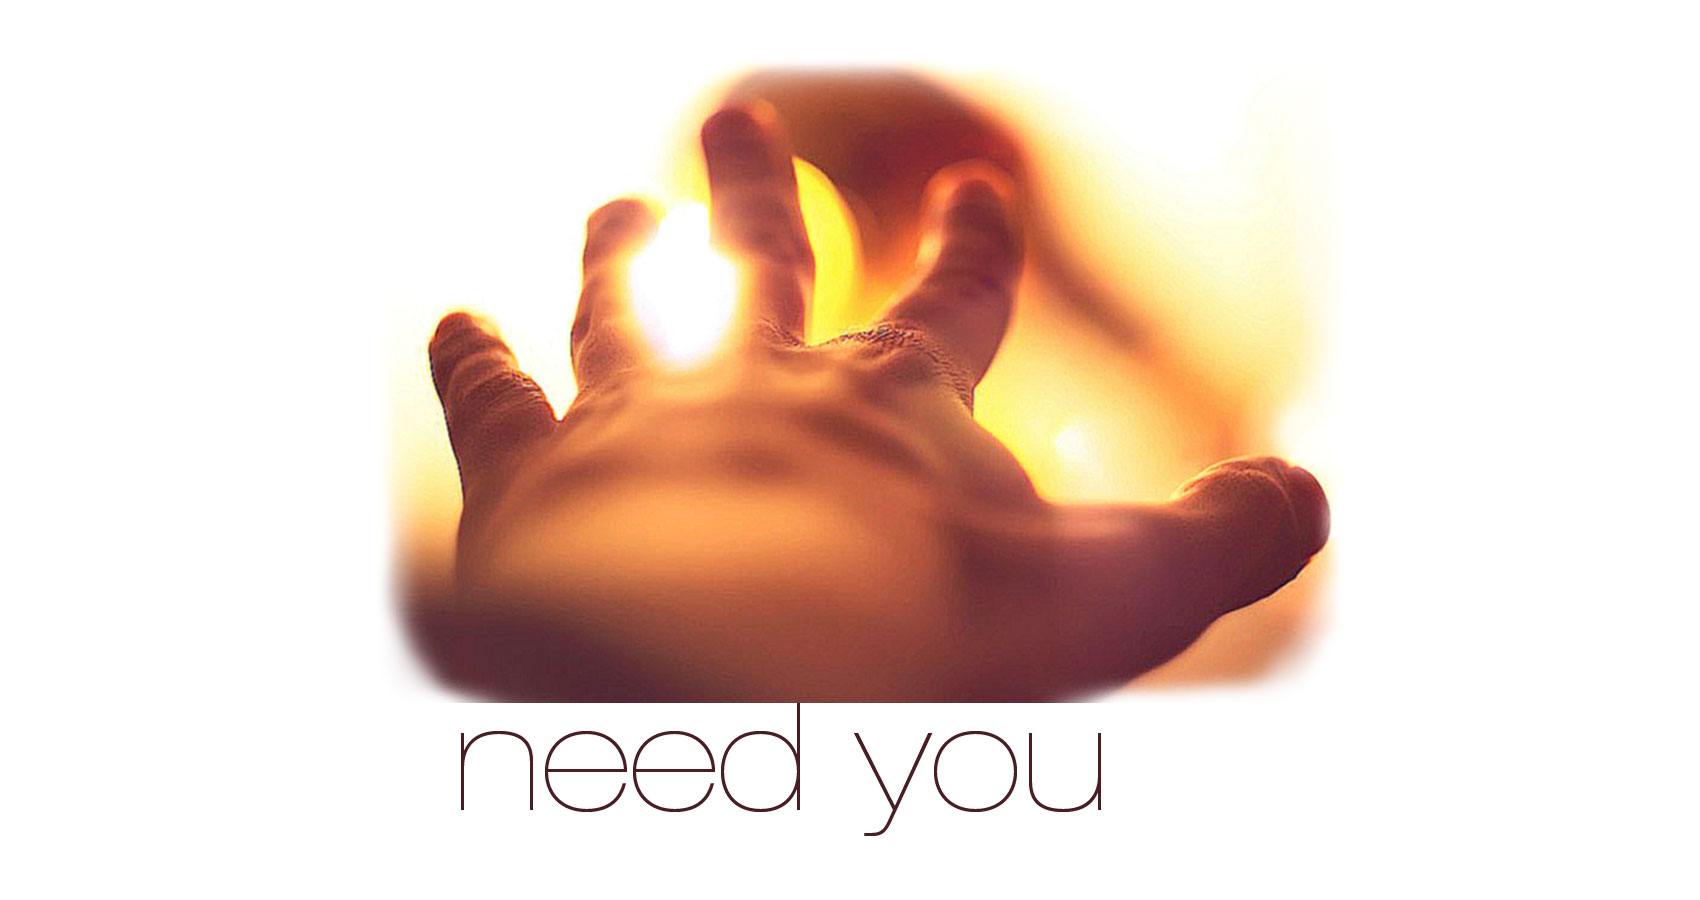 Need You, by Lana Wesley at Spillwords.com